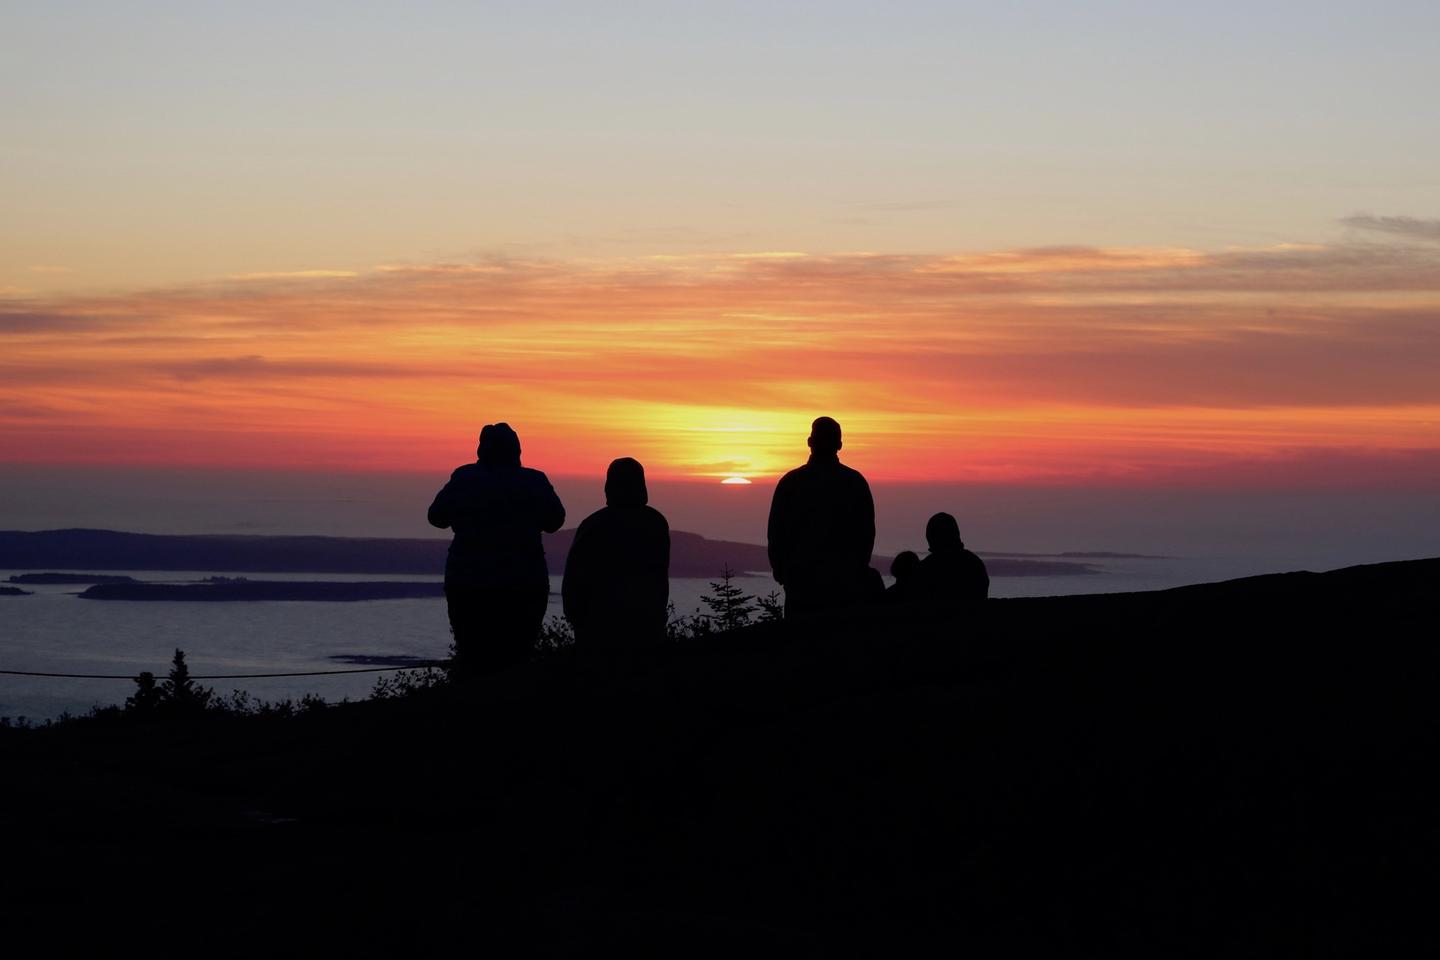 Five people shown in silhouette watch the bright orange and red sunrise on the horizon overlooking the ocean from a mountain top.Sunrise on Cadillac Mountain.